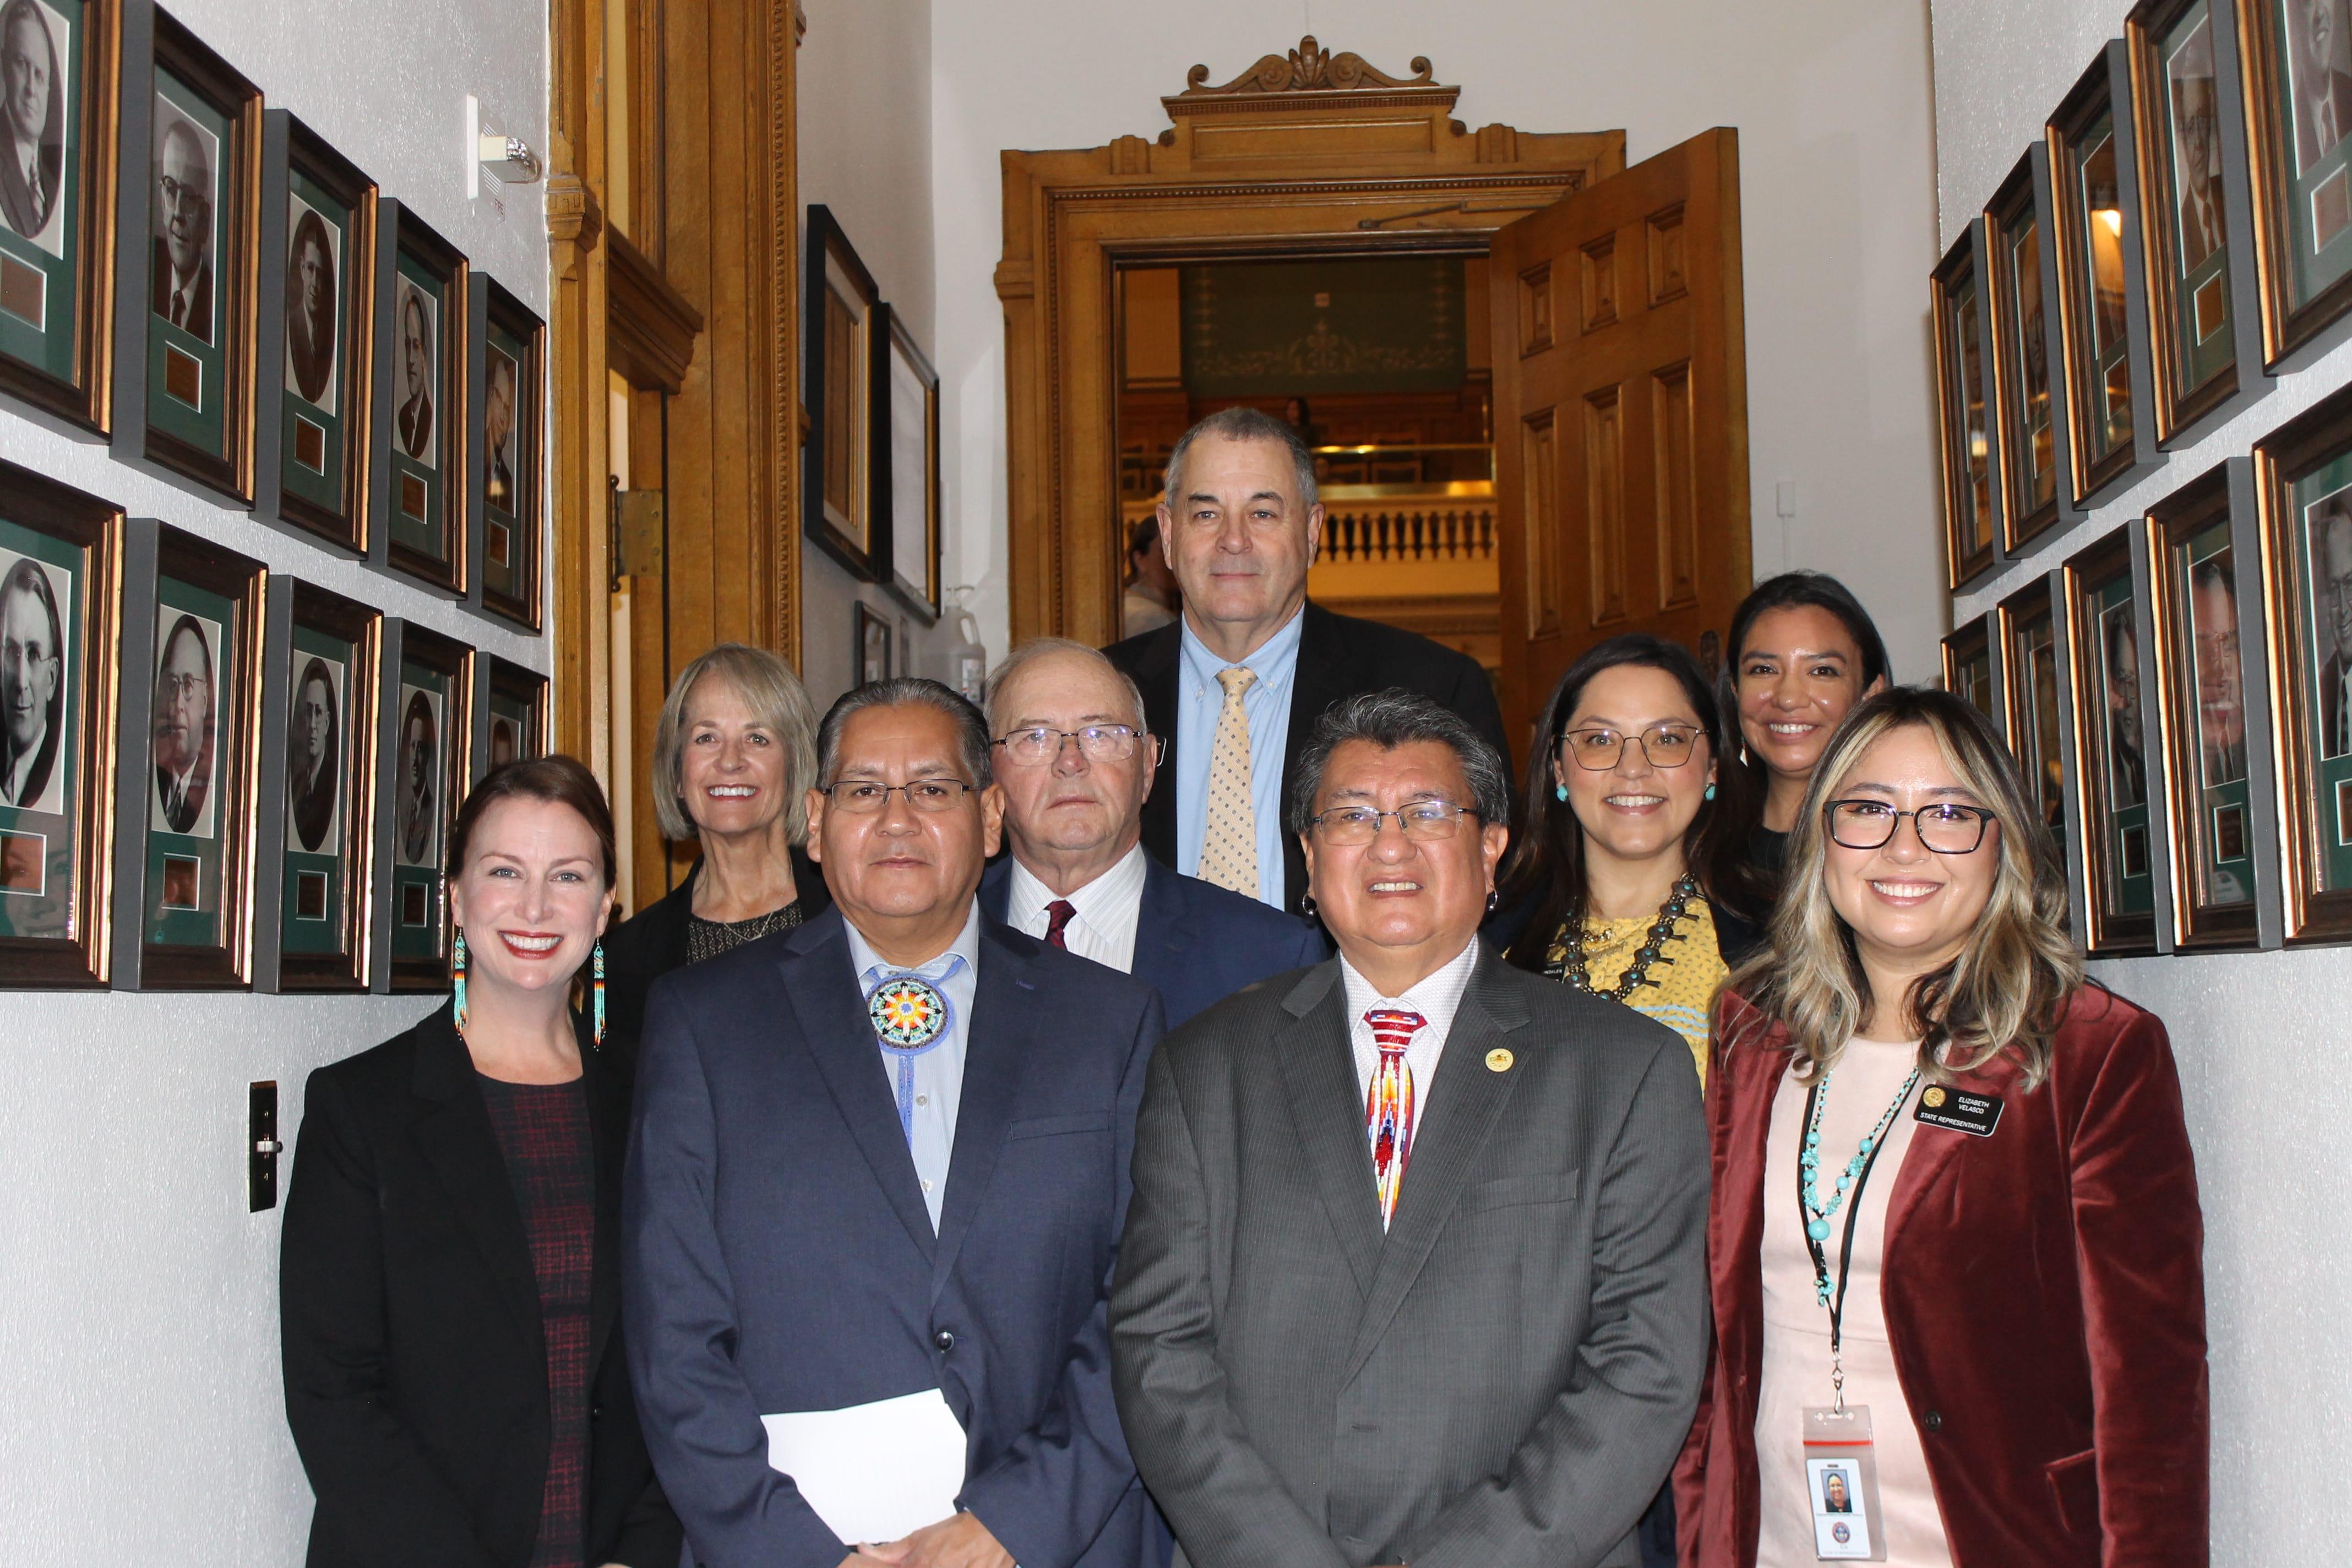 The Chairmen of the Southern Ute Indian Tribe and Ute Mountain Ute Tribe are pictured with representatives of the Colorado General Assembly before the Chairmen addressed the joint session.